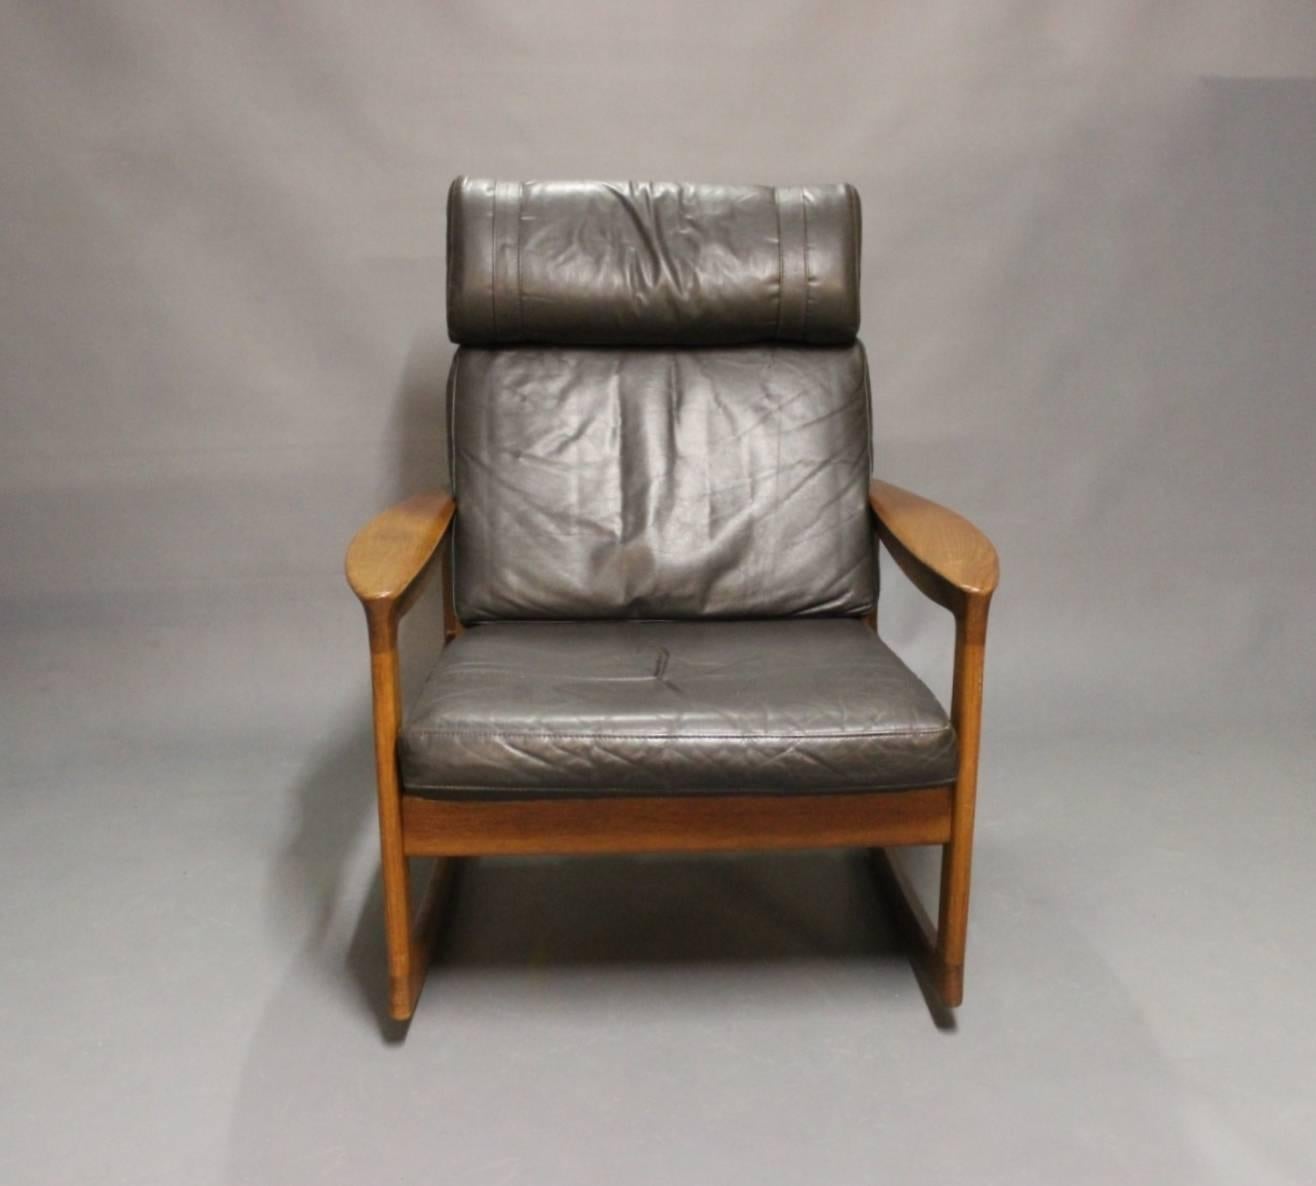 Rocking chair in teak and black Classic leather designed by Ole Wanscher and manufactured at Komfort furniture factory in the 1960s. We have a matching sofa, easy chair and stool in stock.